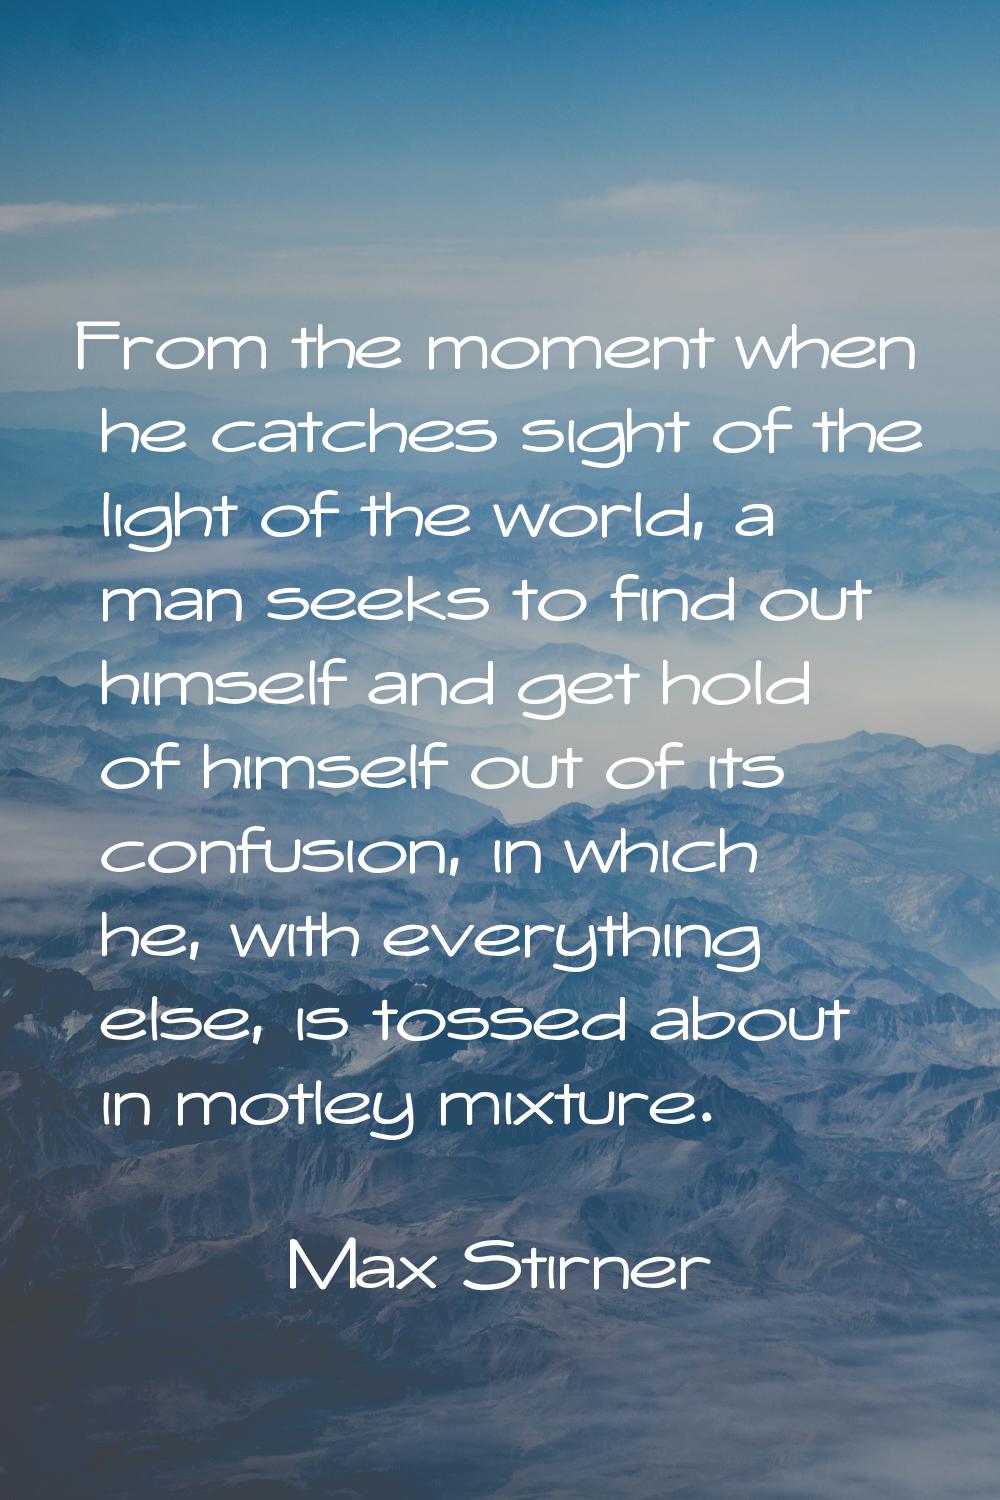 From the moment when he catches sight of the light of the world, a man seeks to find out himself an